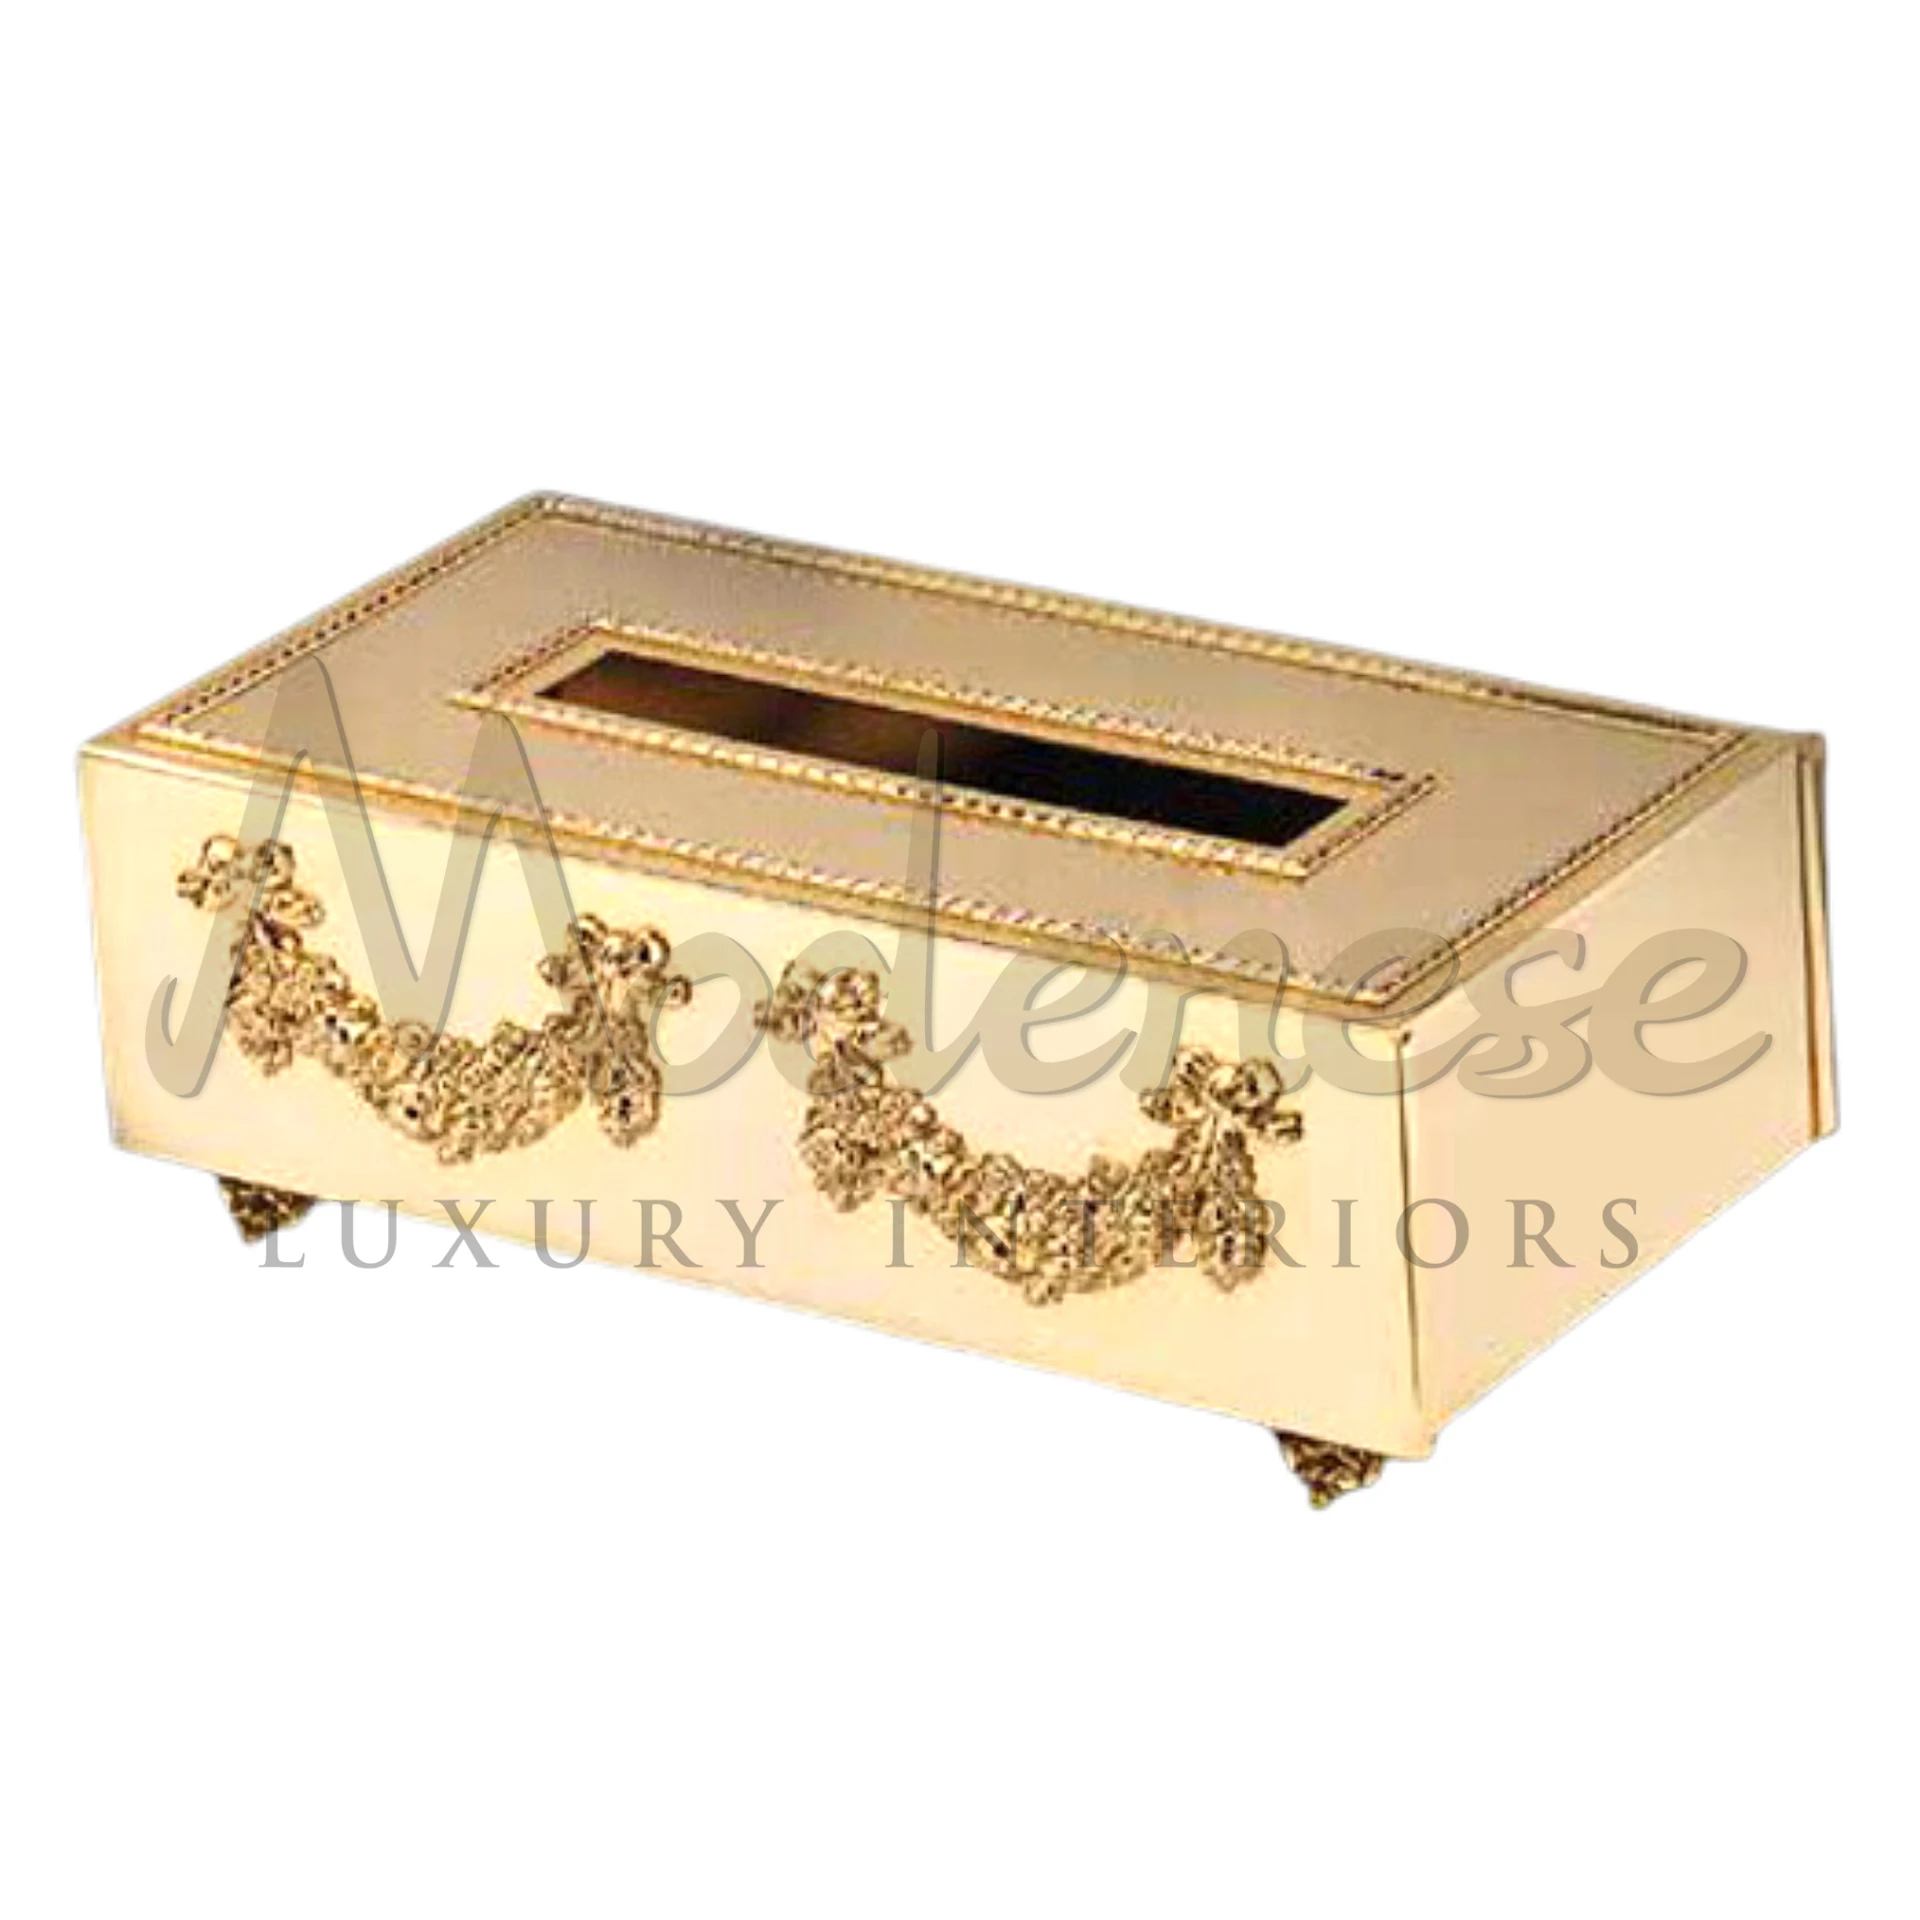 Classical Gold Tissue Cover with intricate patterns, adding elegance to bathroom decor alongside items like toothbrush holders and soap dispensers.






